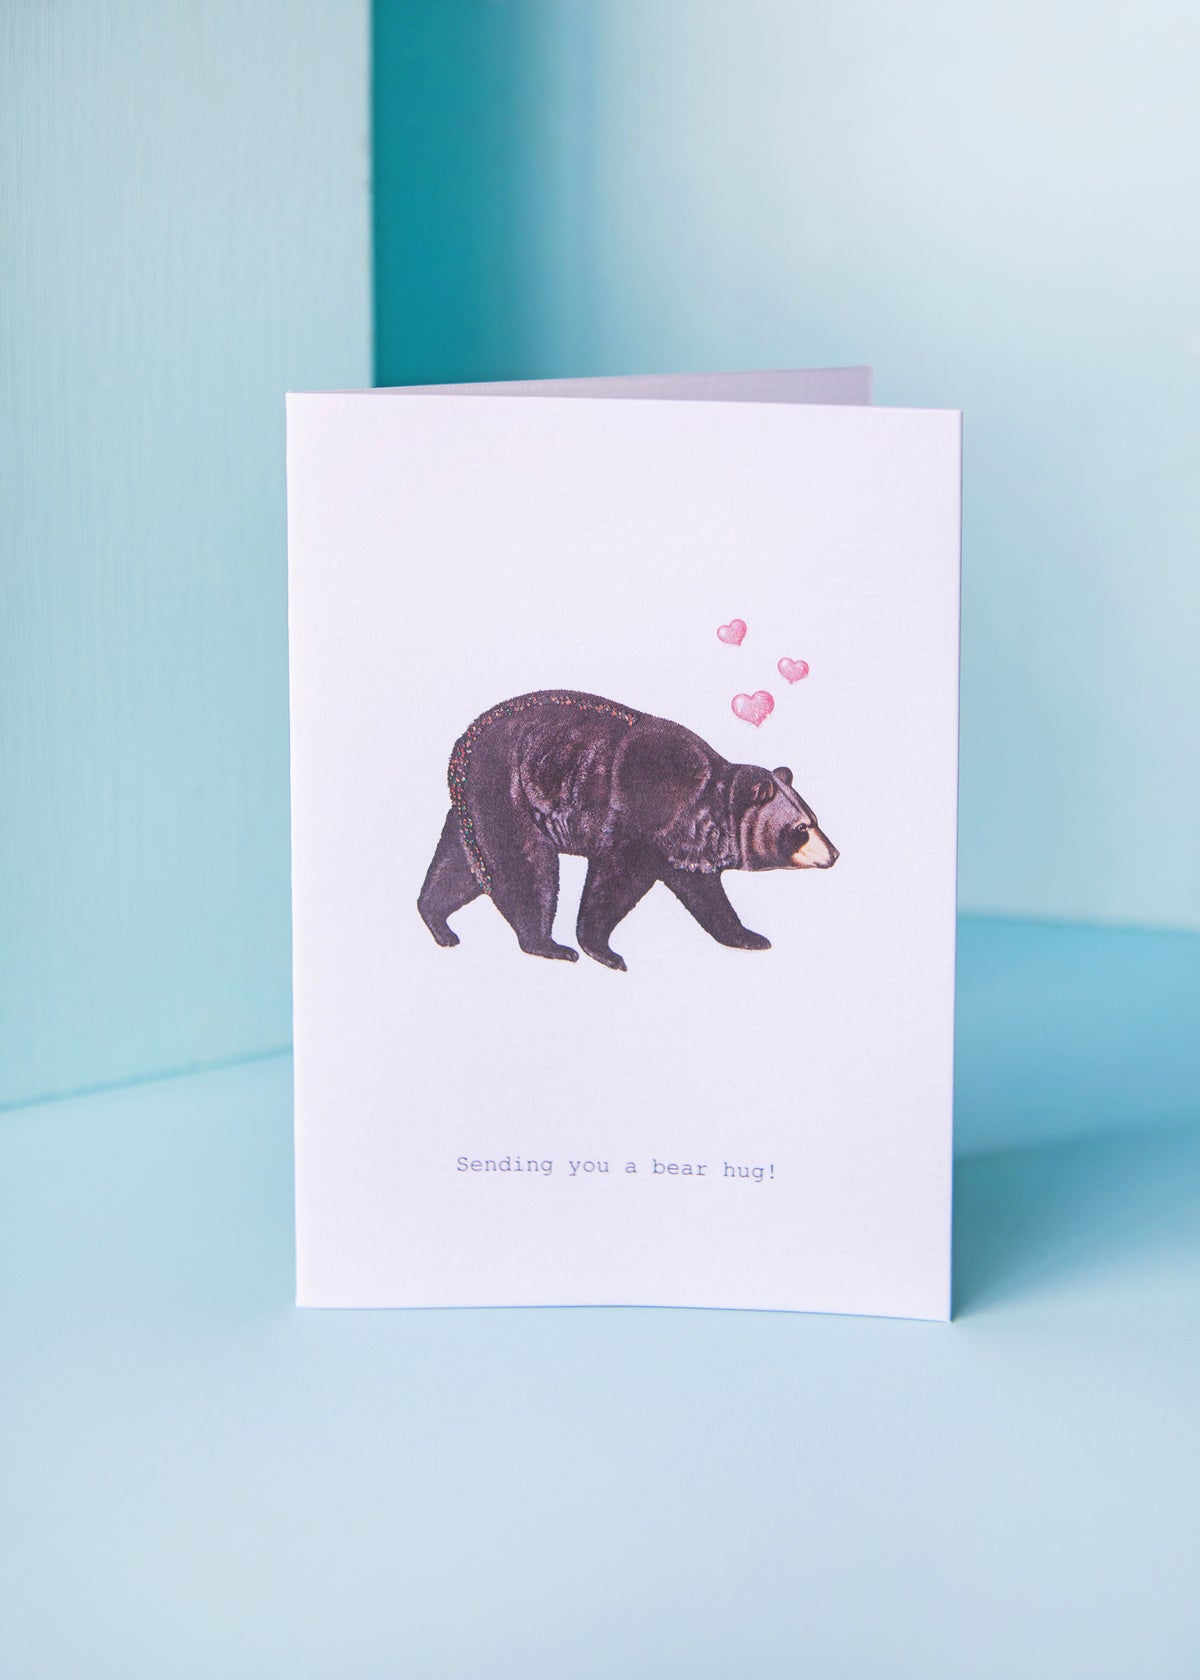 A TokyoMilk Bear Hug Greeting Card crafted from textured paper stands against a soft blue background. It features an illustration of a brown bear with three pink hearts above its head and the caption "Sending you a bear hug!" by Margot Elena.